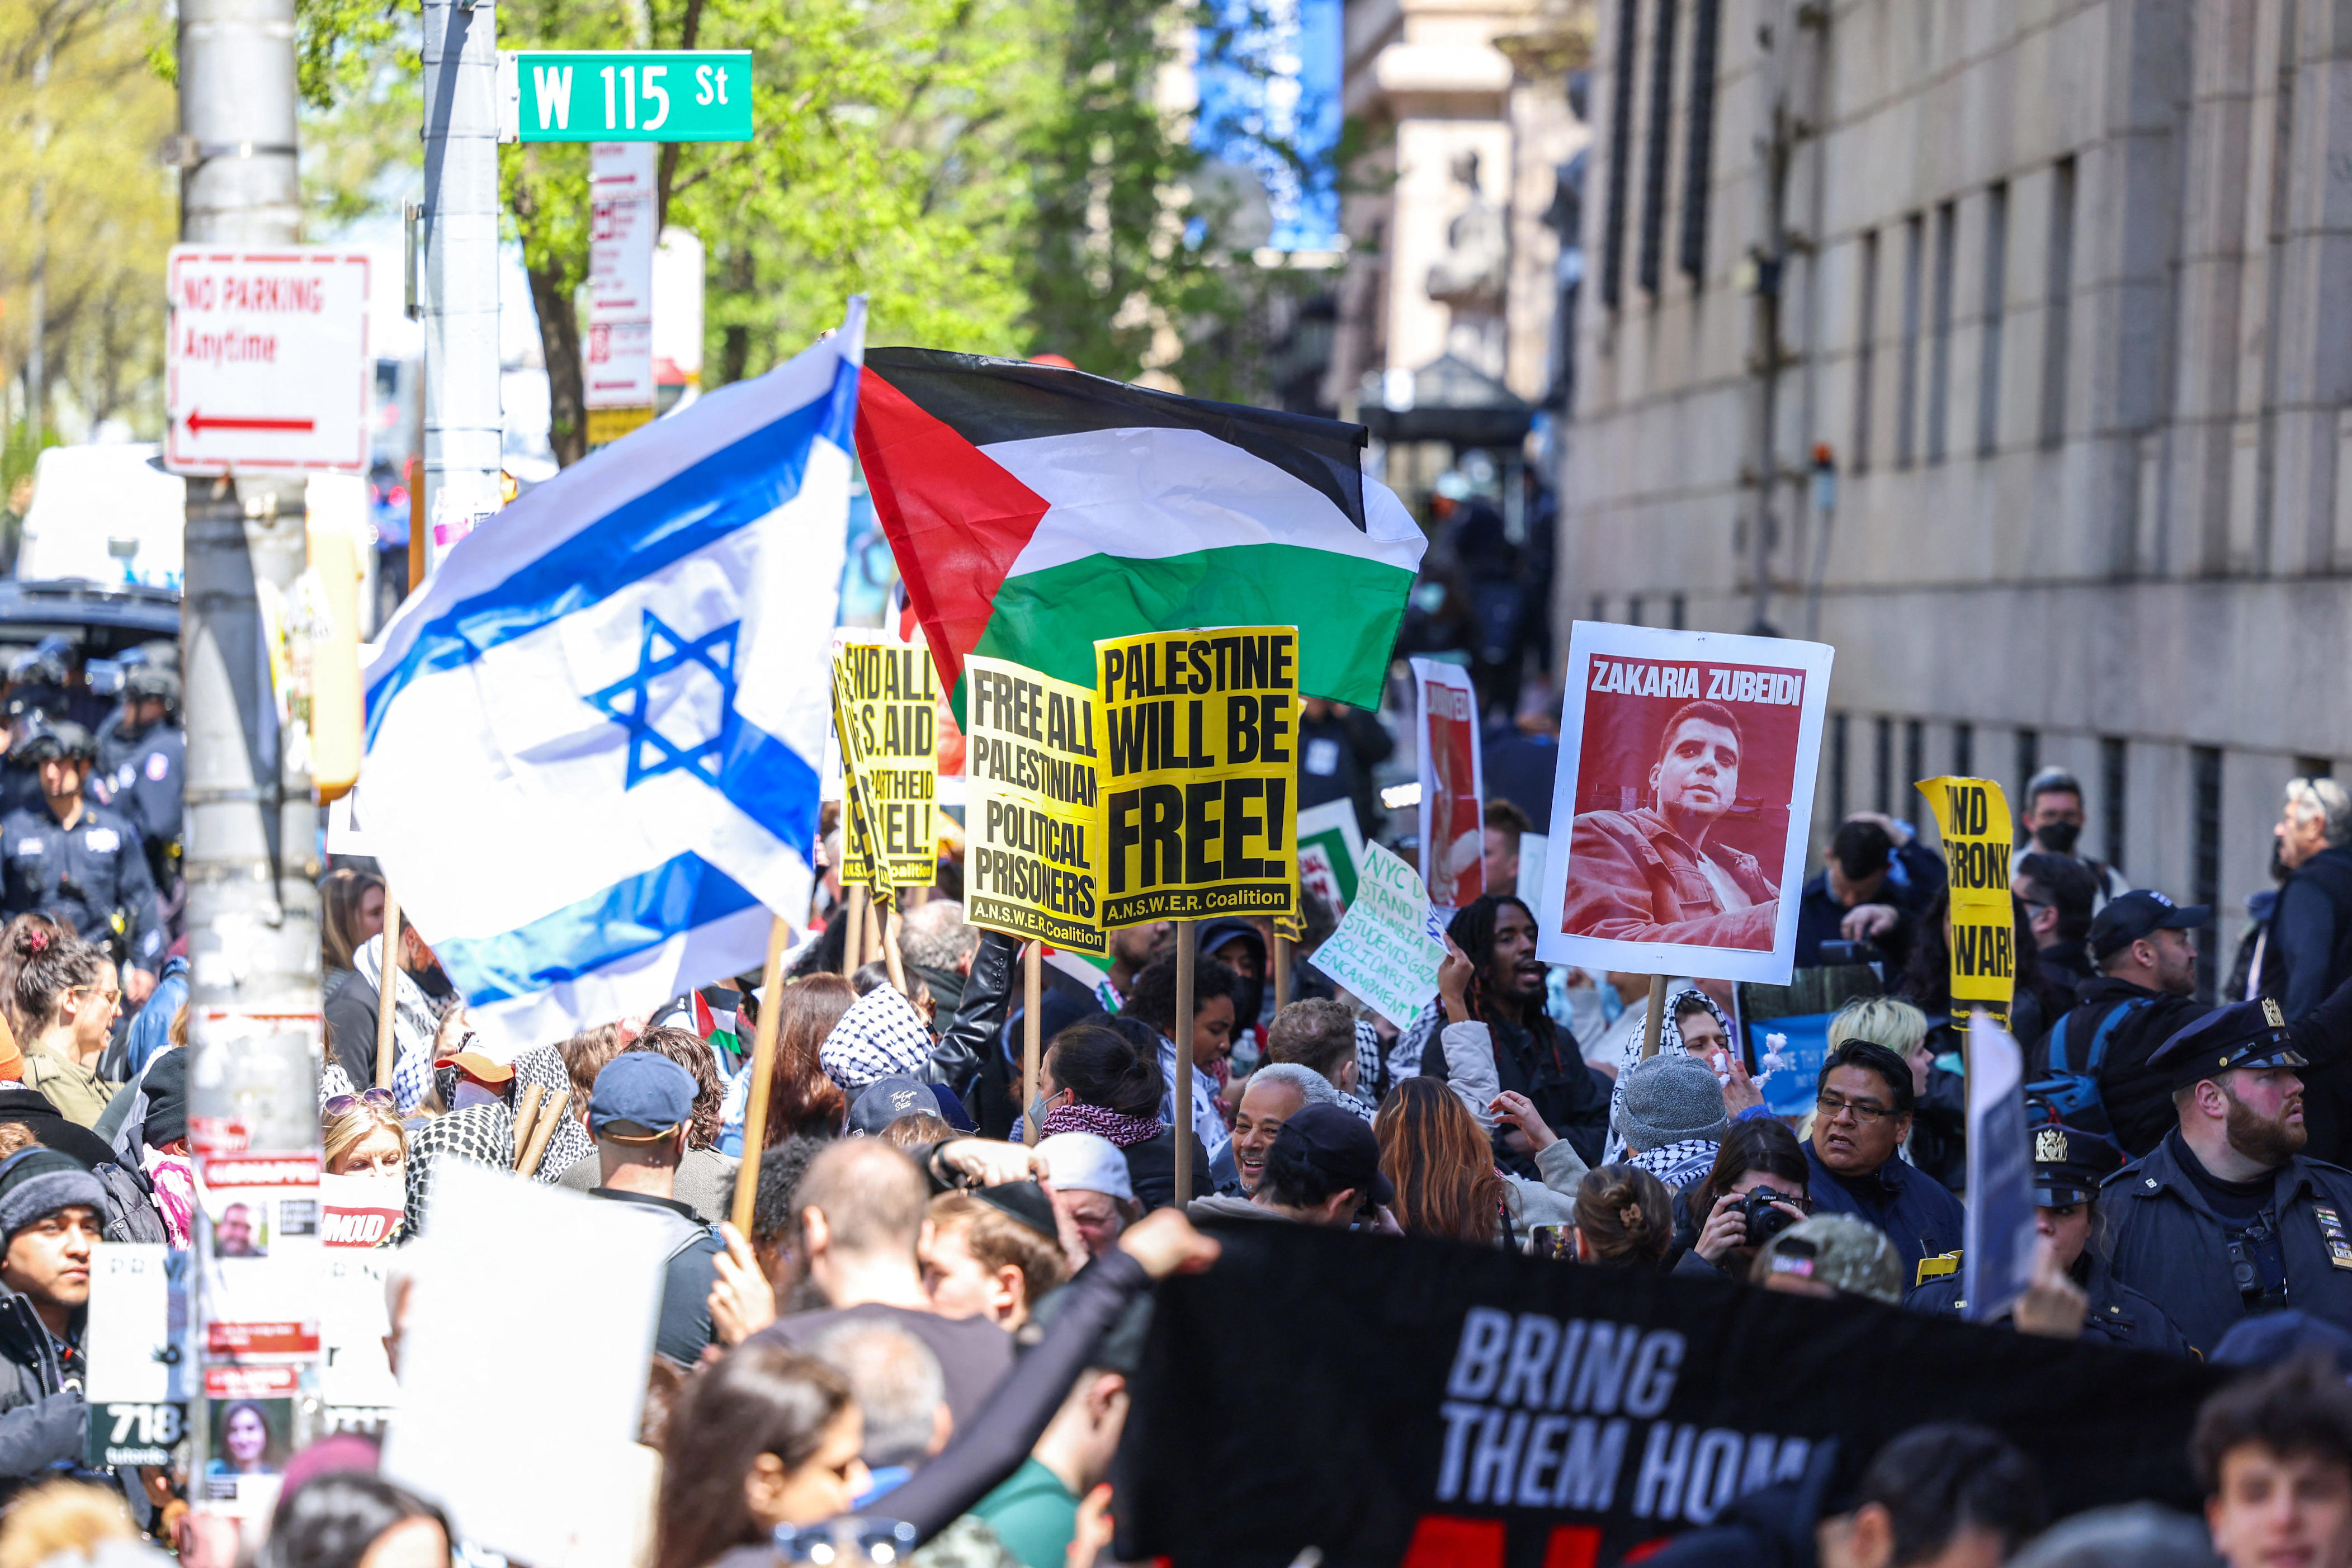 protests resume in new york as us campuses brace for more unrest over gaza war: live updates